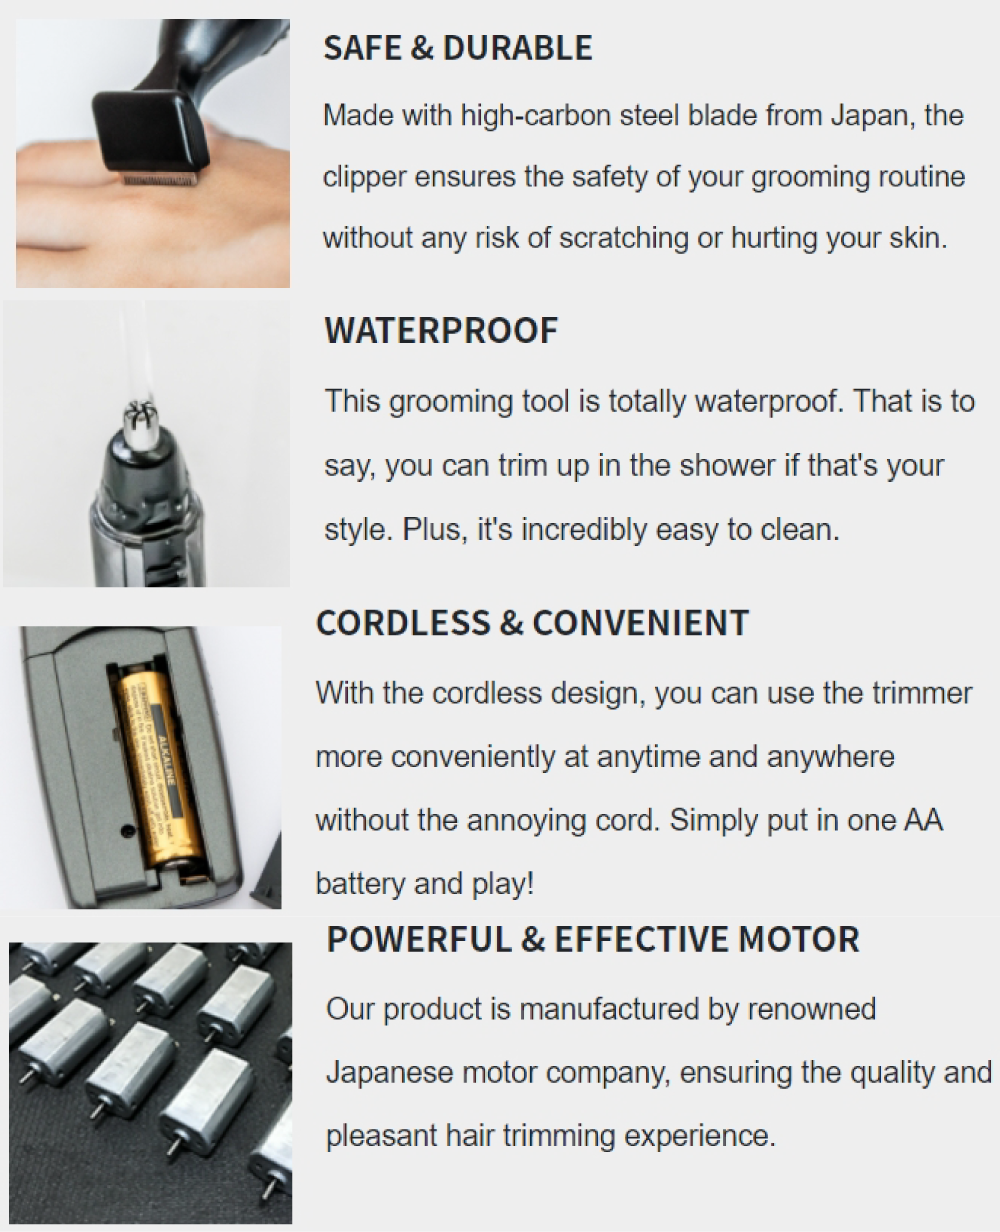 nose eyebrow hair trimmer sideburn beard ear electric waterproof shaver battery kit cordless high carbon steel blade combs washable rubber wet dry facial mustache gift brow compact shape urbaner touch razors men nut liner eye razor clipper clippers shavers trimmers mens grooming tools